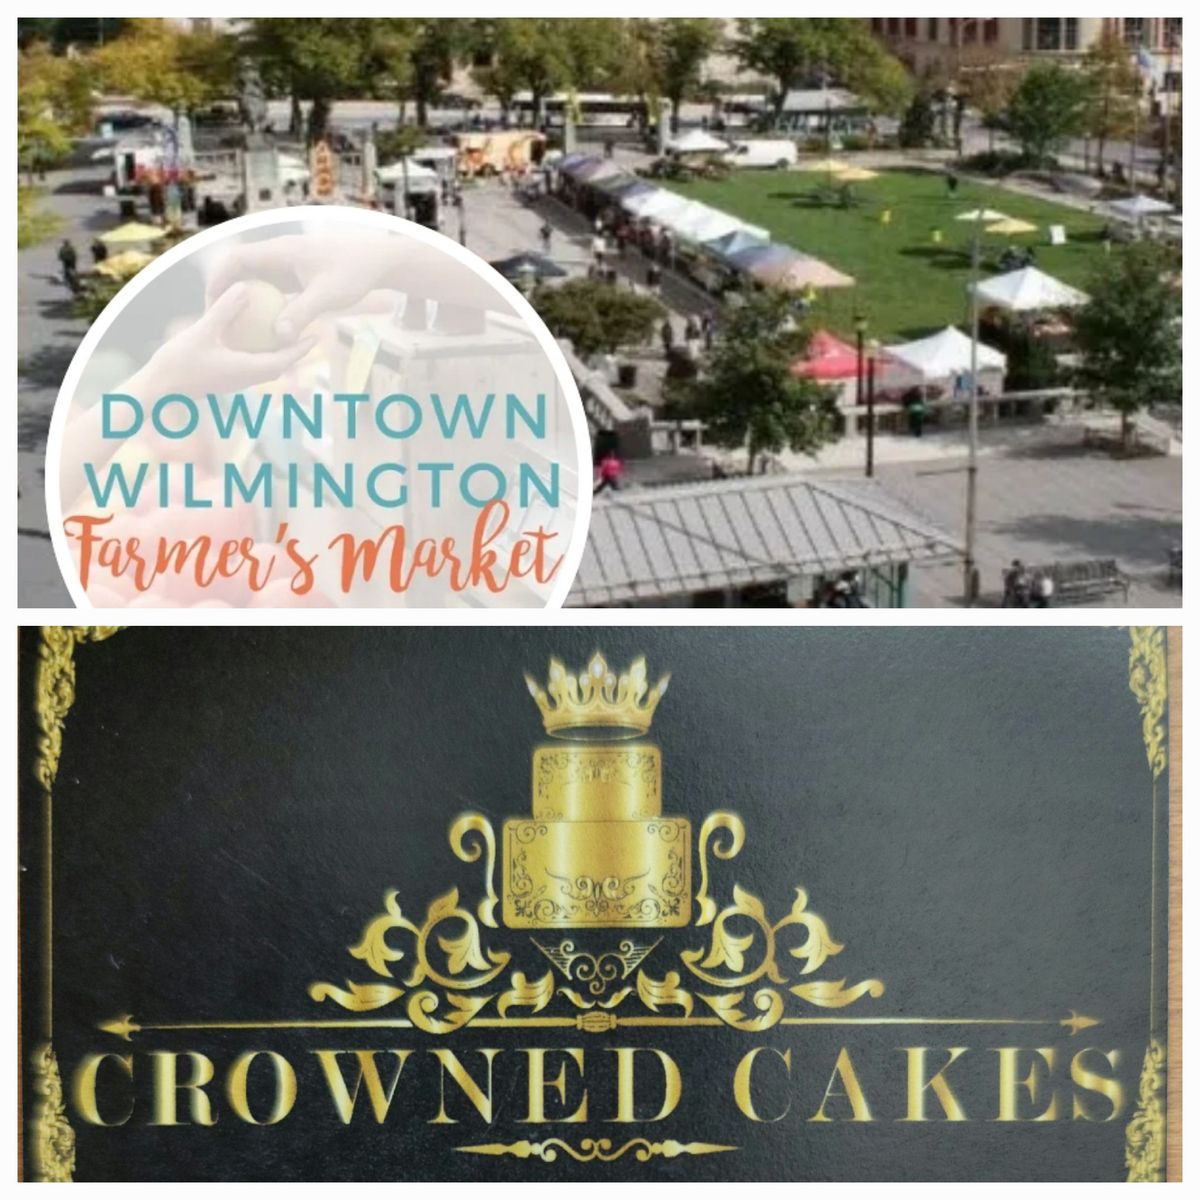 Crowned Cakes at Rodney Square